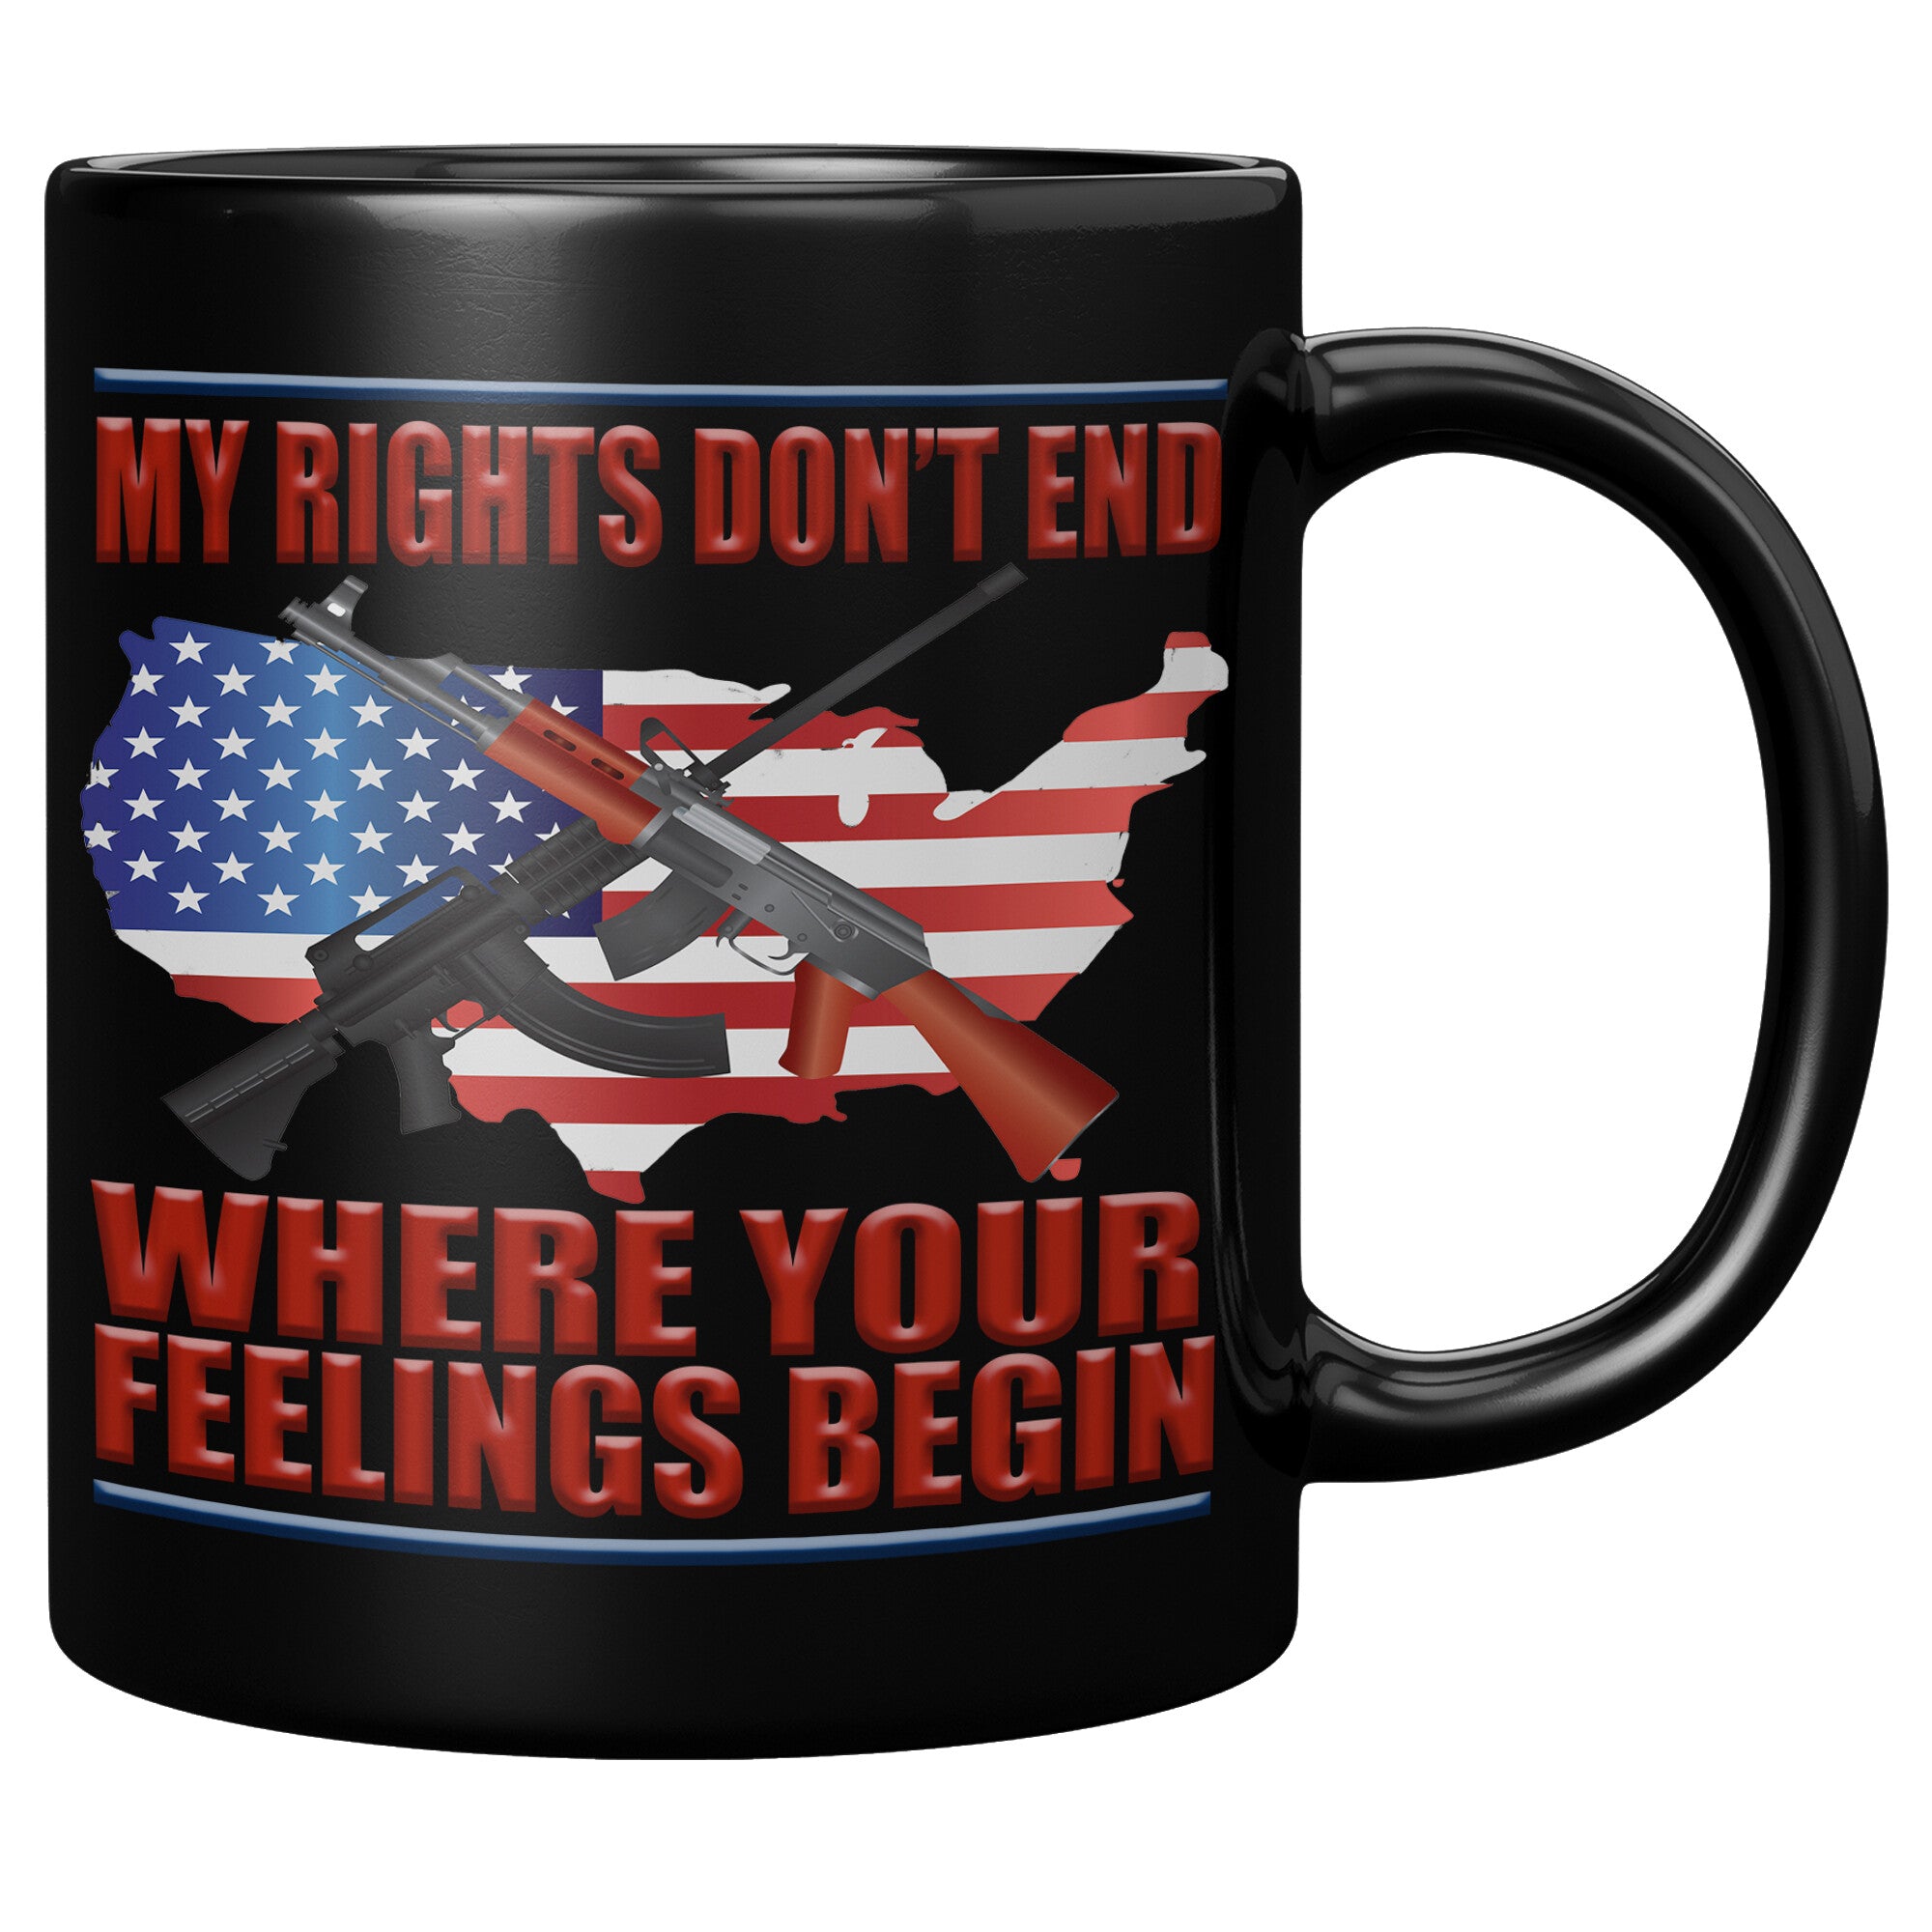 MY RIGHTS DON'T END WHERE YOUR FEELINGS BEGIN